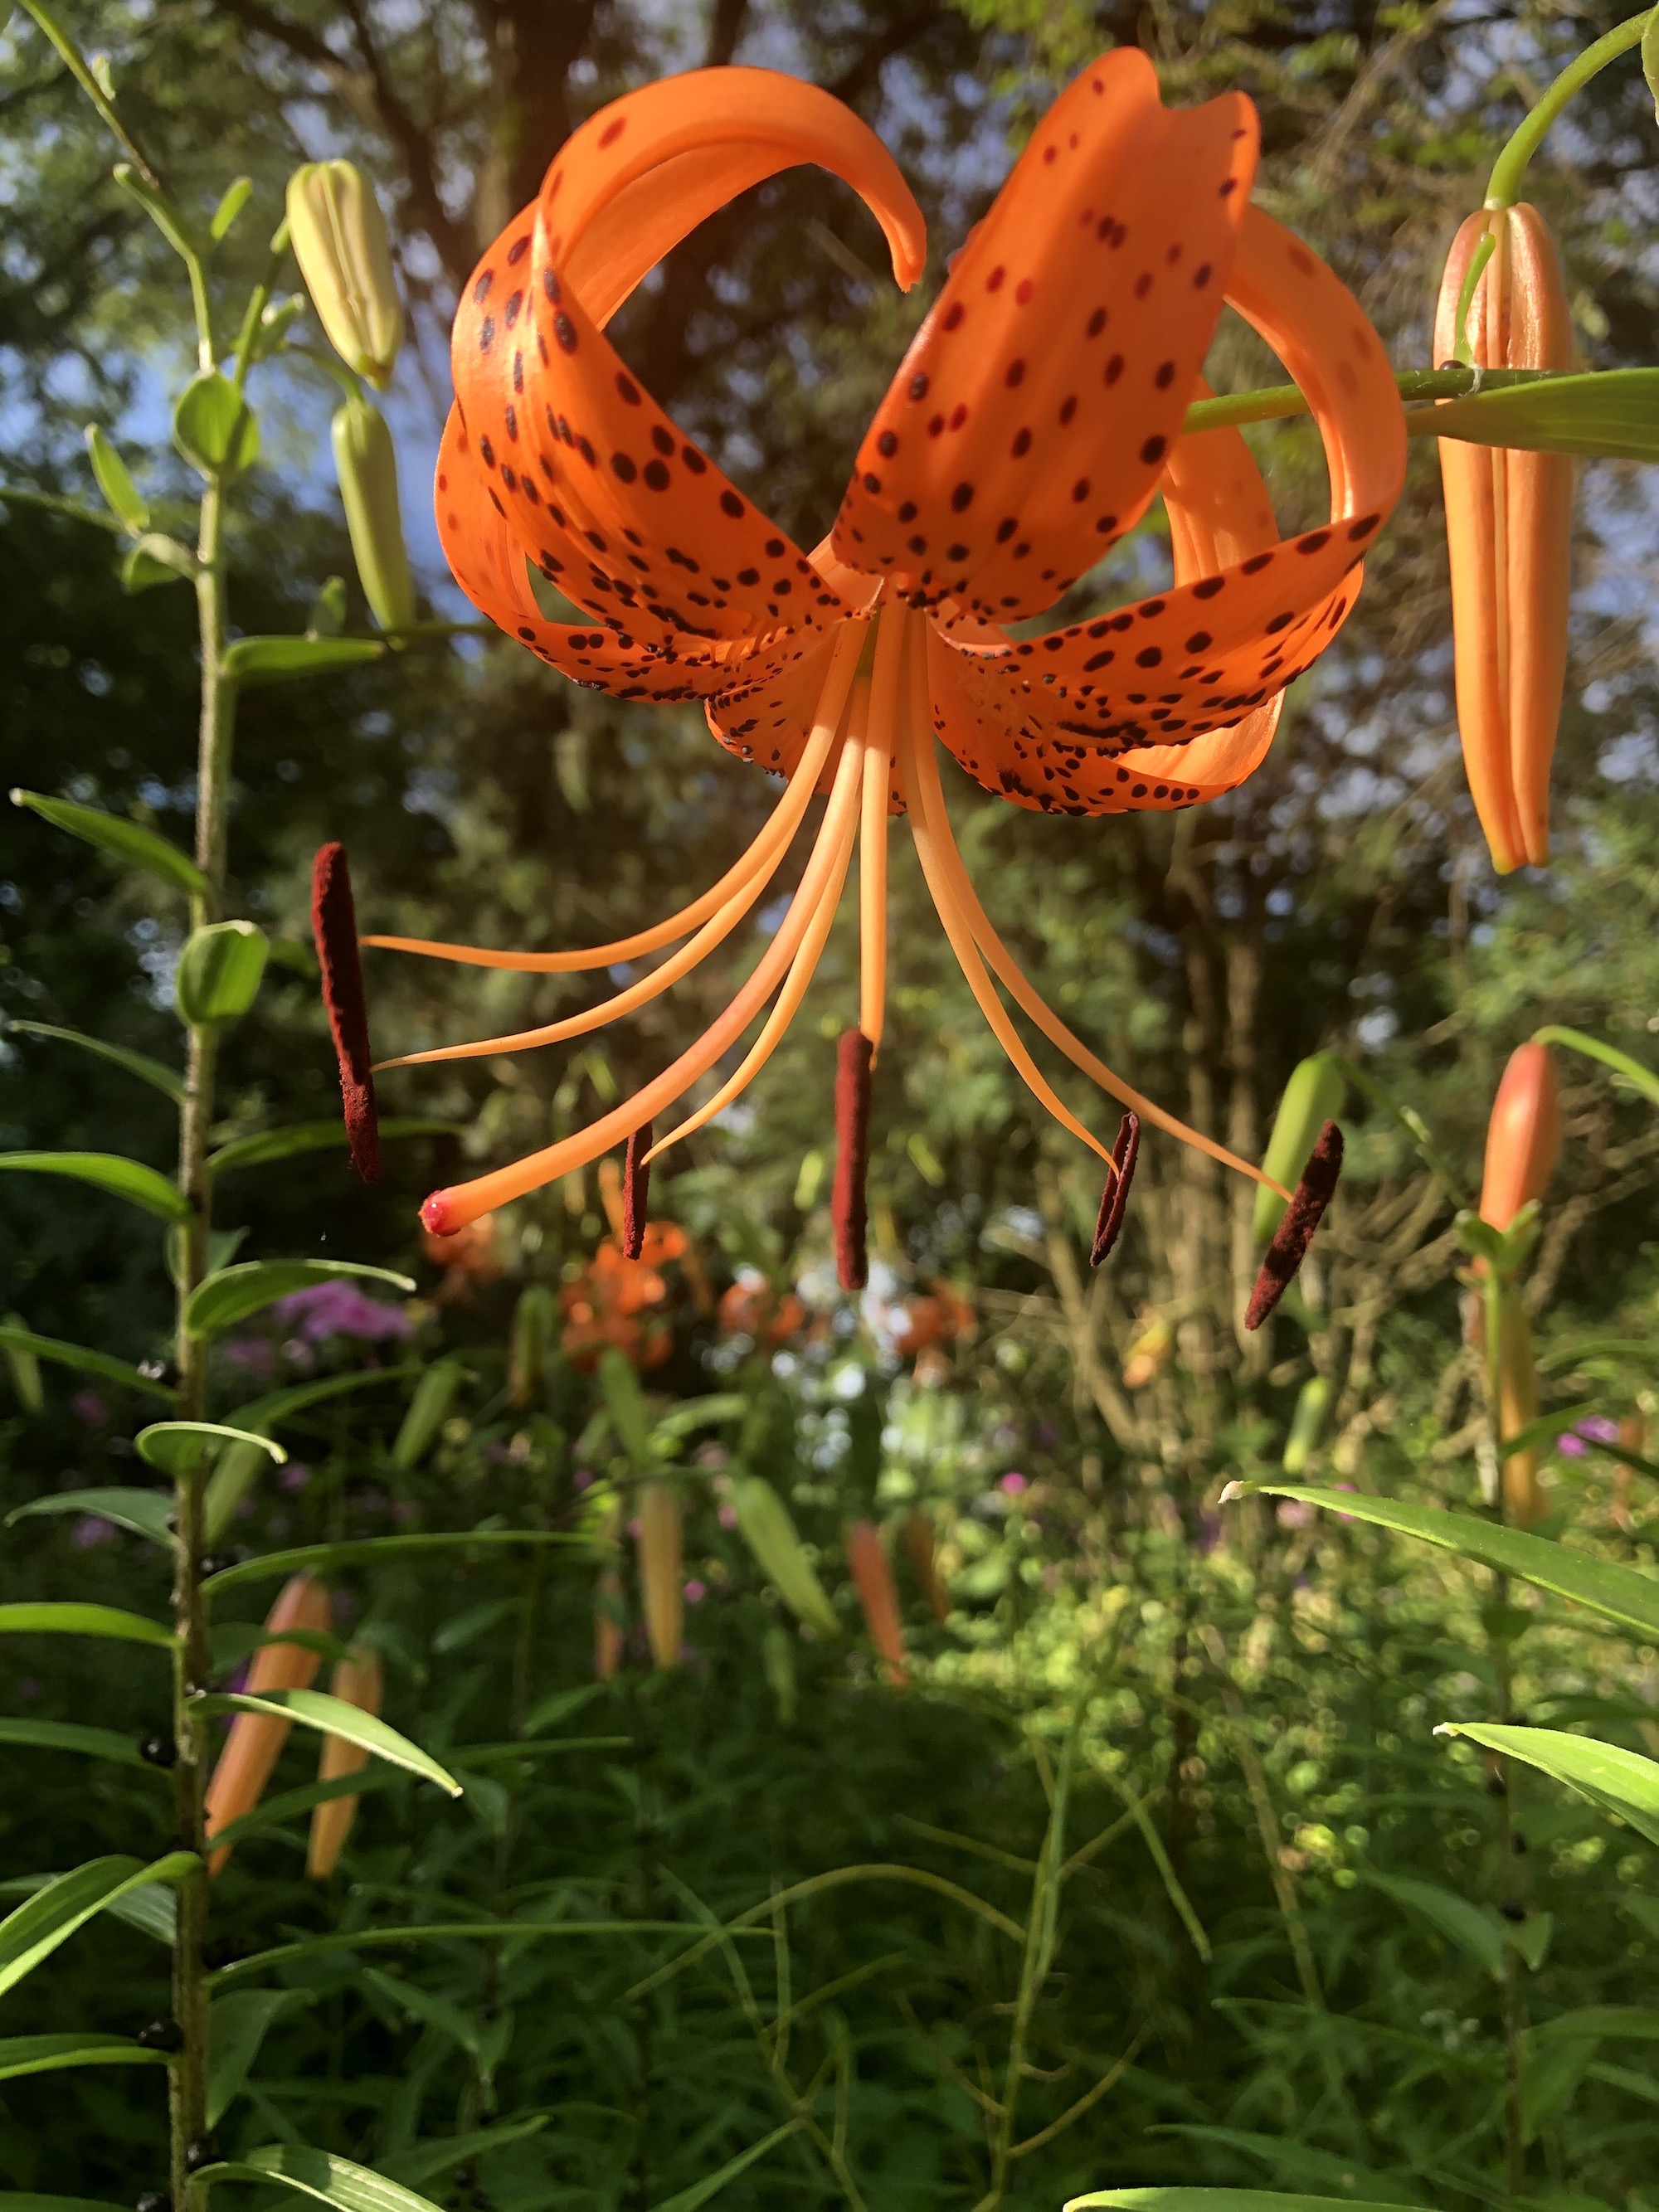 Tiger Lily near the Duck Pond on July 21, 2020.